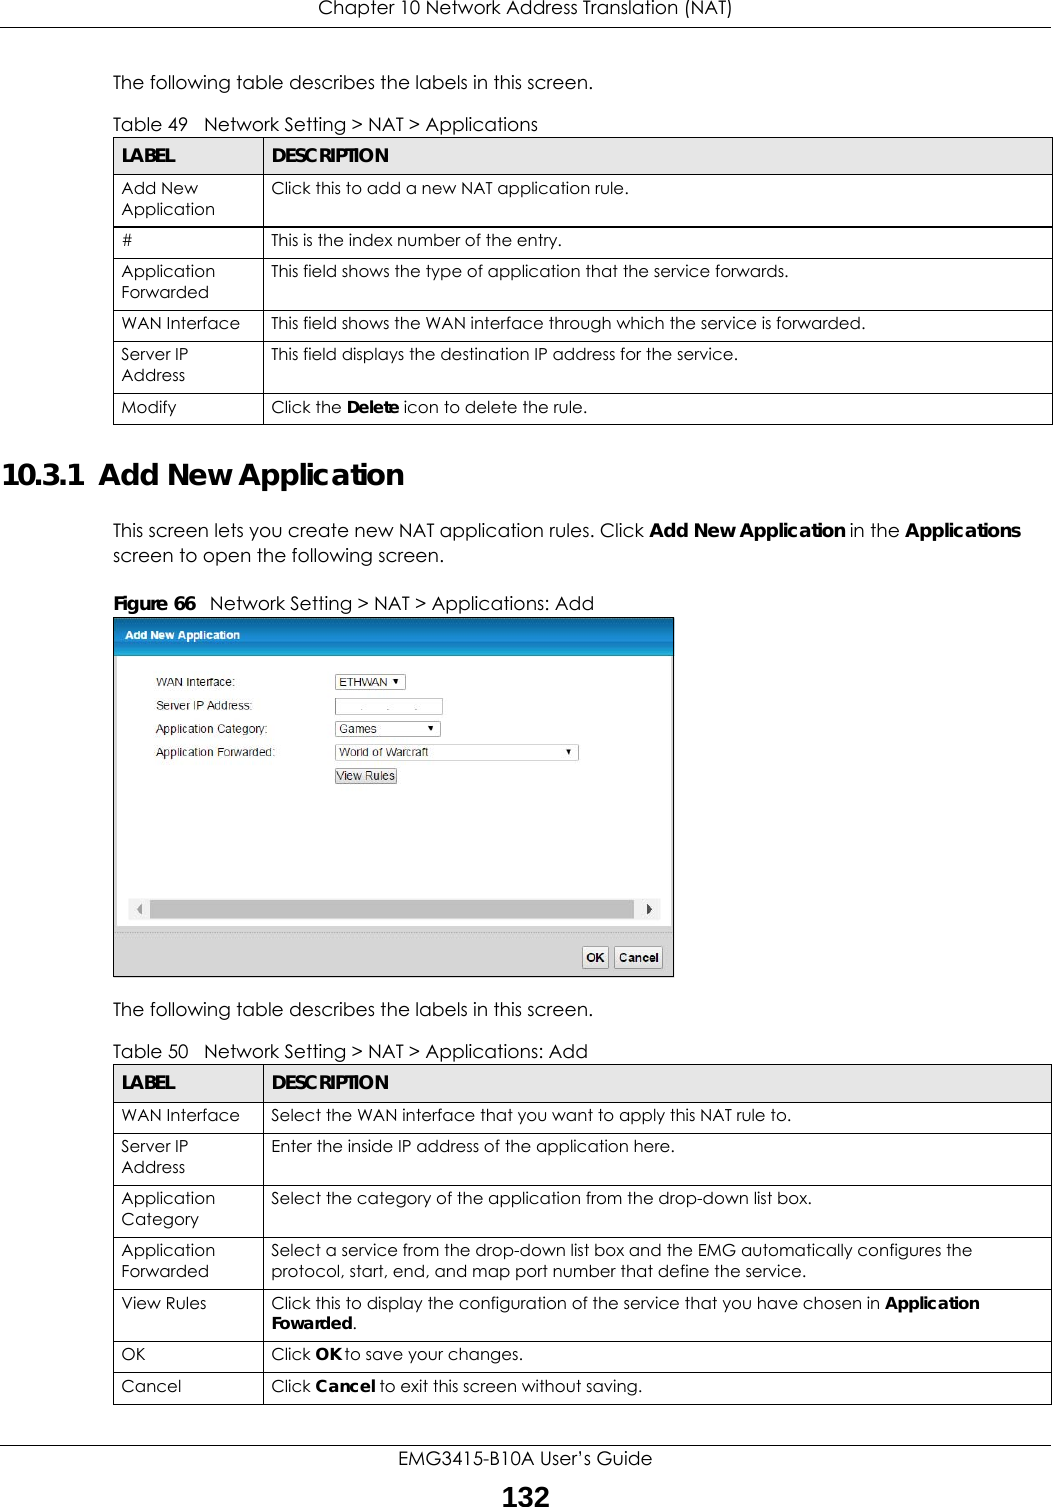 Chapter 10 Network Address Translation (NAT)EMG3415-B10A User’s Guide132The following table describes the labels in this screen. 10.3.1  Add New ApplicationThis screen lets you create new NAT application rules. Click Add New Application in the Applications screen to open the following screen.Figure 66   Network Setting &gt; NAT &gt; Applications: Add The following table describes the labels in this screen. Table 49   Network Setting &gt; NAT &gt; ApplicationsLABEL DESCRIPTIONAdd New ApplicationClick this to add a new NAT application rule.#This is the index number of the entry.Application ForwardedThis field shows the type of application that the service forwards.WAN Interface This field shows the WAN interface through which the service is forwarded.Server IP AddressThis field displays the destination IP address for the service.Modify Click the Delete icon to delete the rule.Table 50   Network Setting &gt; NAT &gt; Applications: AddLABEL DESCRIPTIONWAN Interface Select the WAN interface that you want to apply this NAT rule to.Server IP AddressEnter the inside IP address of the application here.Application CategorySelect the category of the application from the drop-down list box.Application ForwardedSelect a service from the drop-down list box and the EMG automatically configures the protocol, start, end, and map port number that define the service.View Rules Click this to display the configuration of the service that you have chosen in Application Fowarded.OK Click OK to save your changes.Cancel Click Cancel to exit this screen without saving.